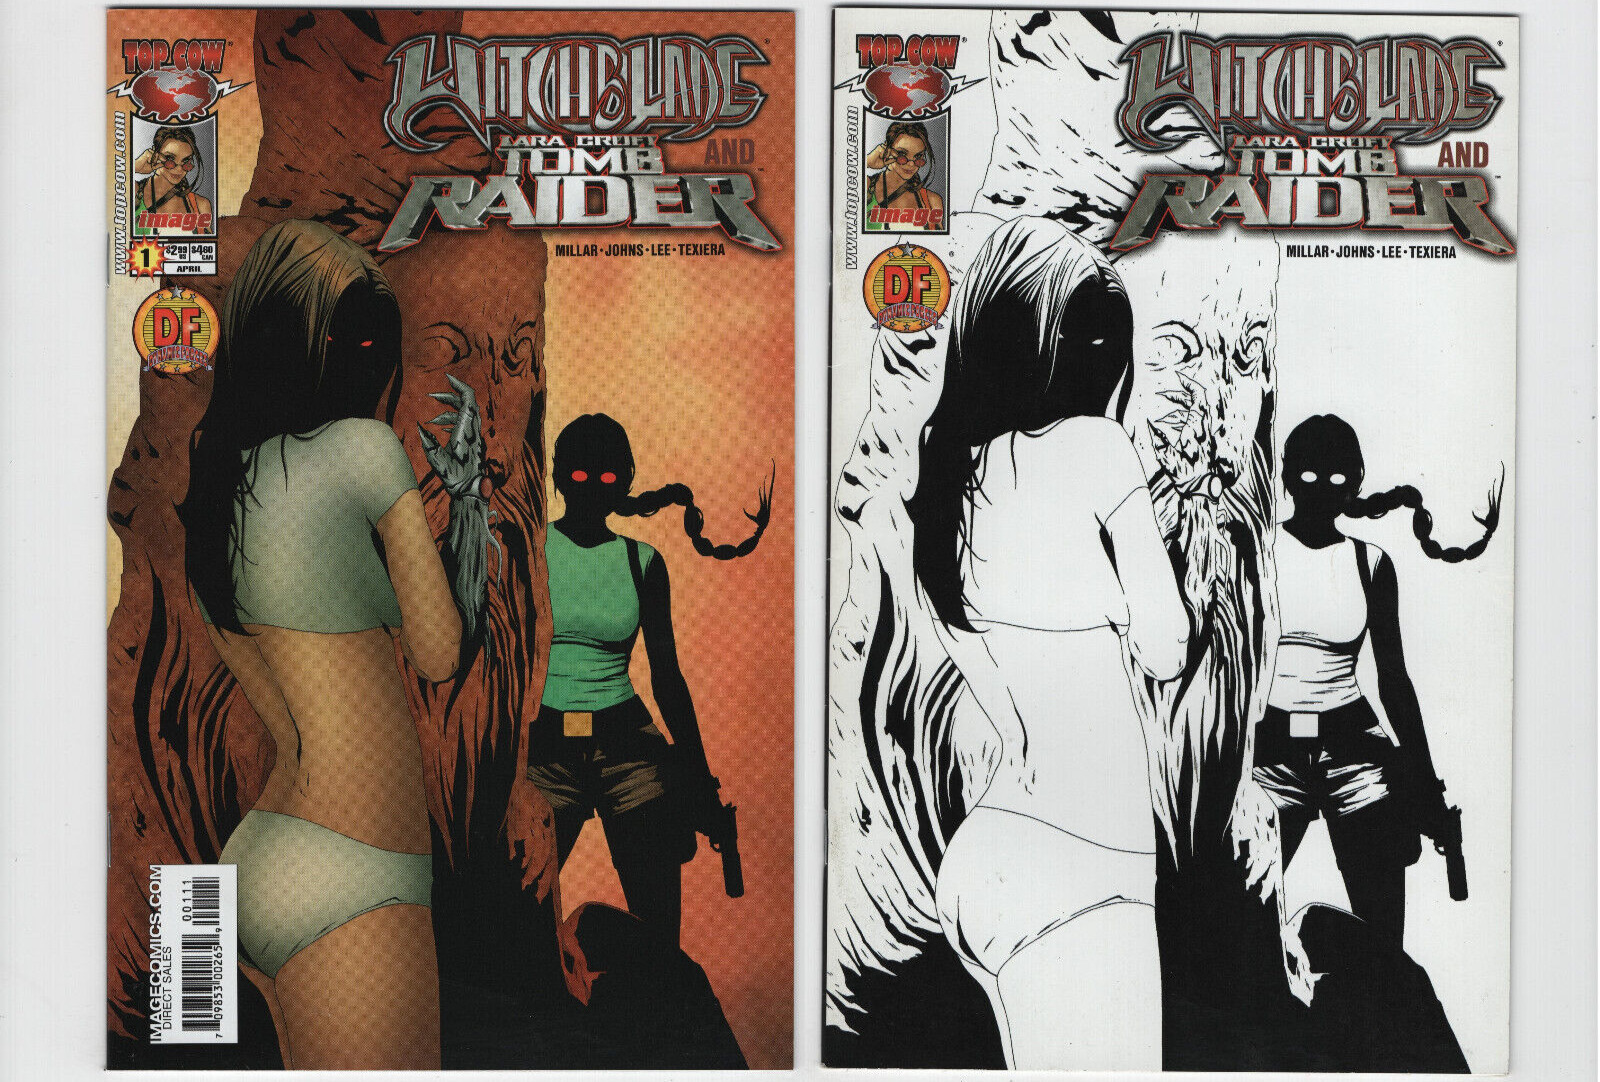 Witchblade & Tomb Raider #1 Color & Black White Dynamic Forces Variant Top Cow